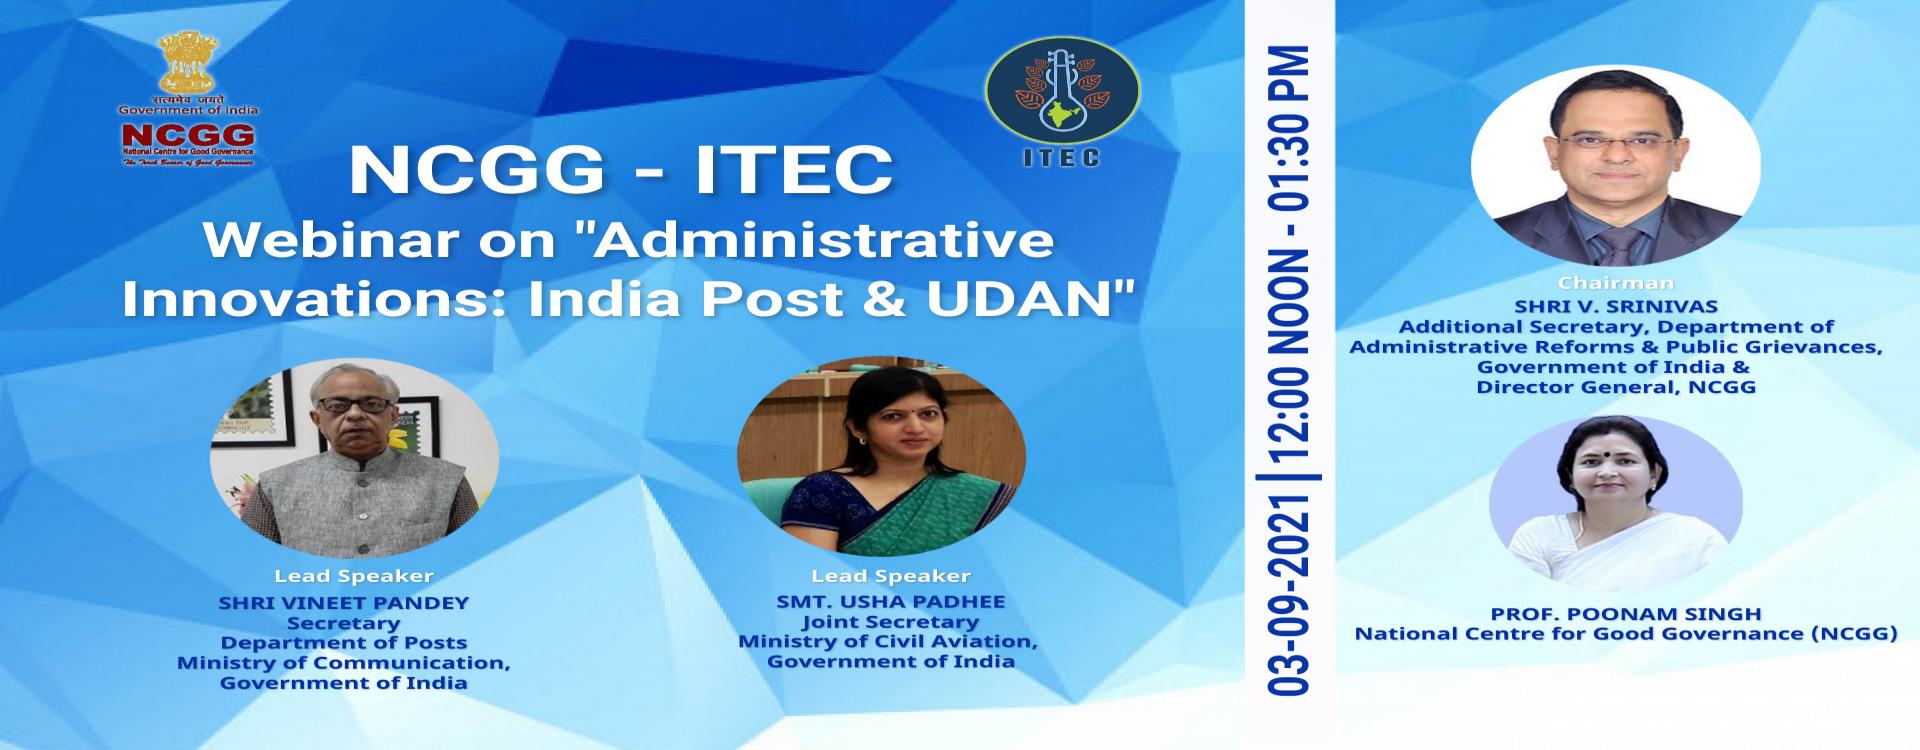 NCGG - ITEC Webinar on &quot;Administrative Innovations - India Post &amp; UDAN&quot; on September 03rd 2021 at 1200 Hrs - 1330 Hrs (IST)